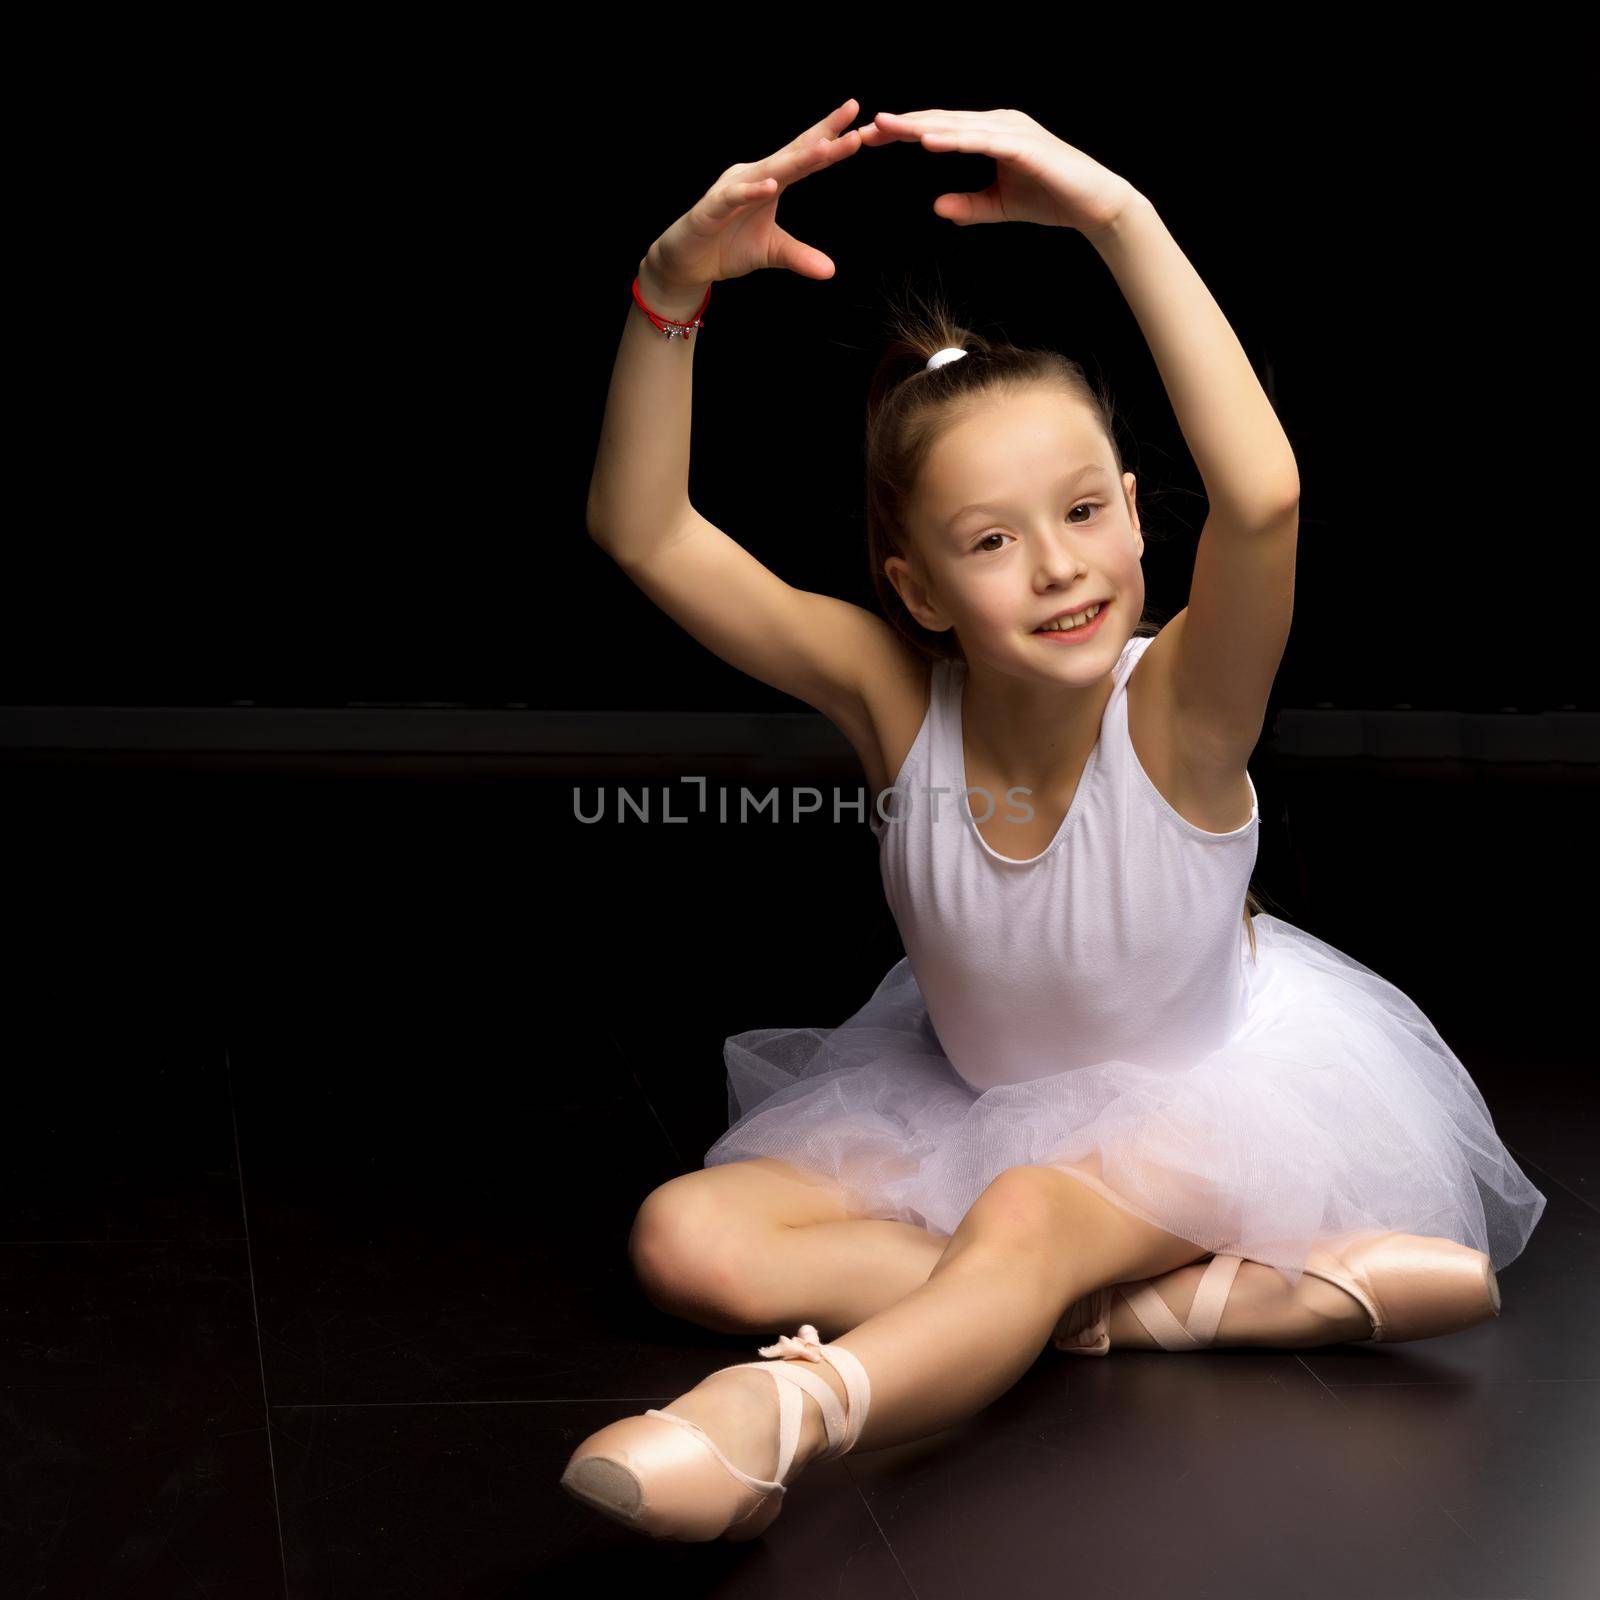 Adorable little girl ballerina. She is posing in pointe shoes, sitting on the floor in the studio. Isolated on a black background.